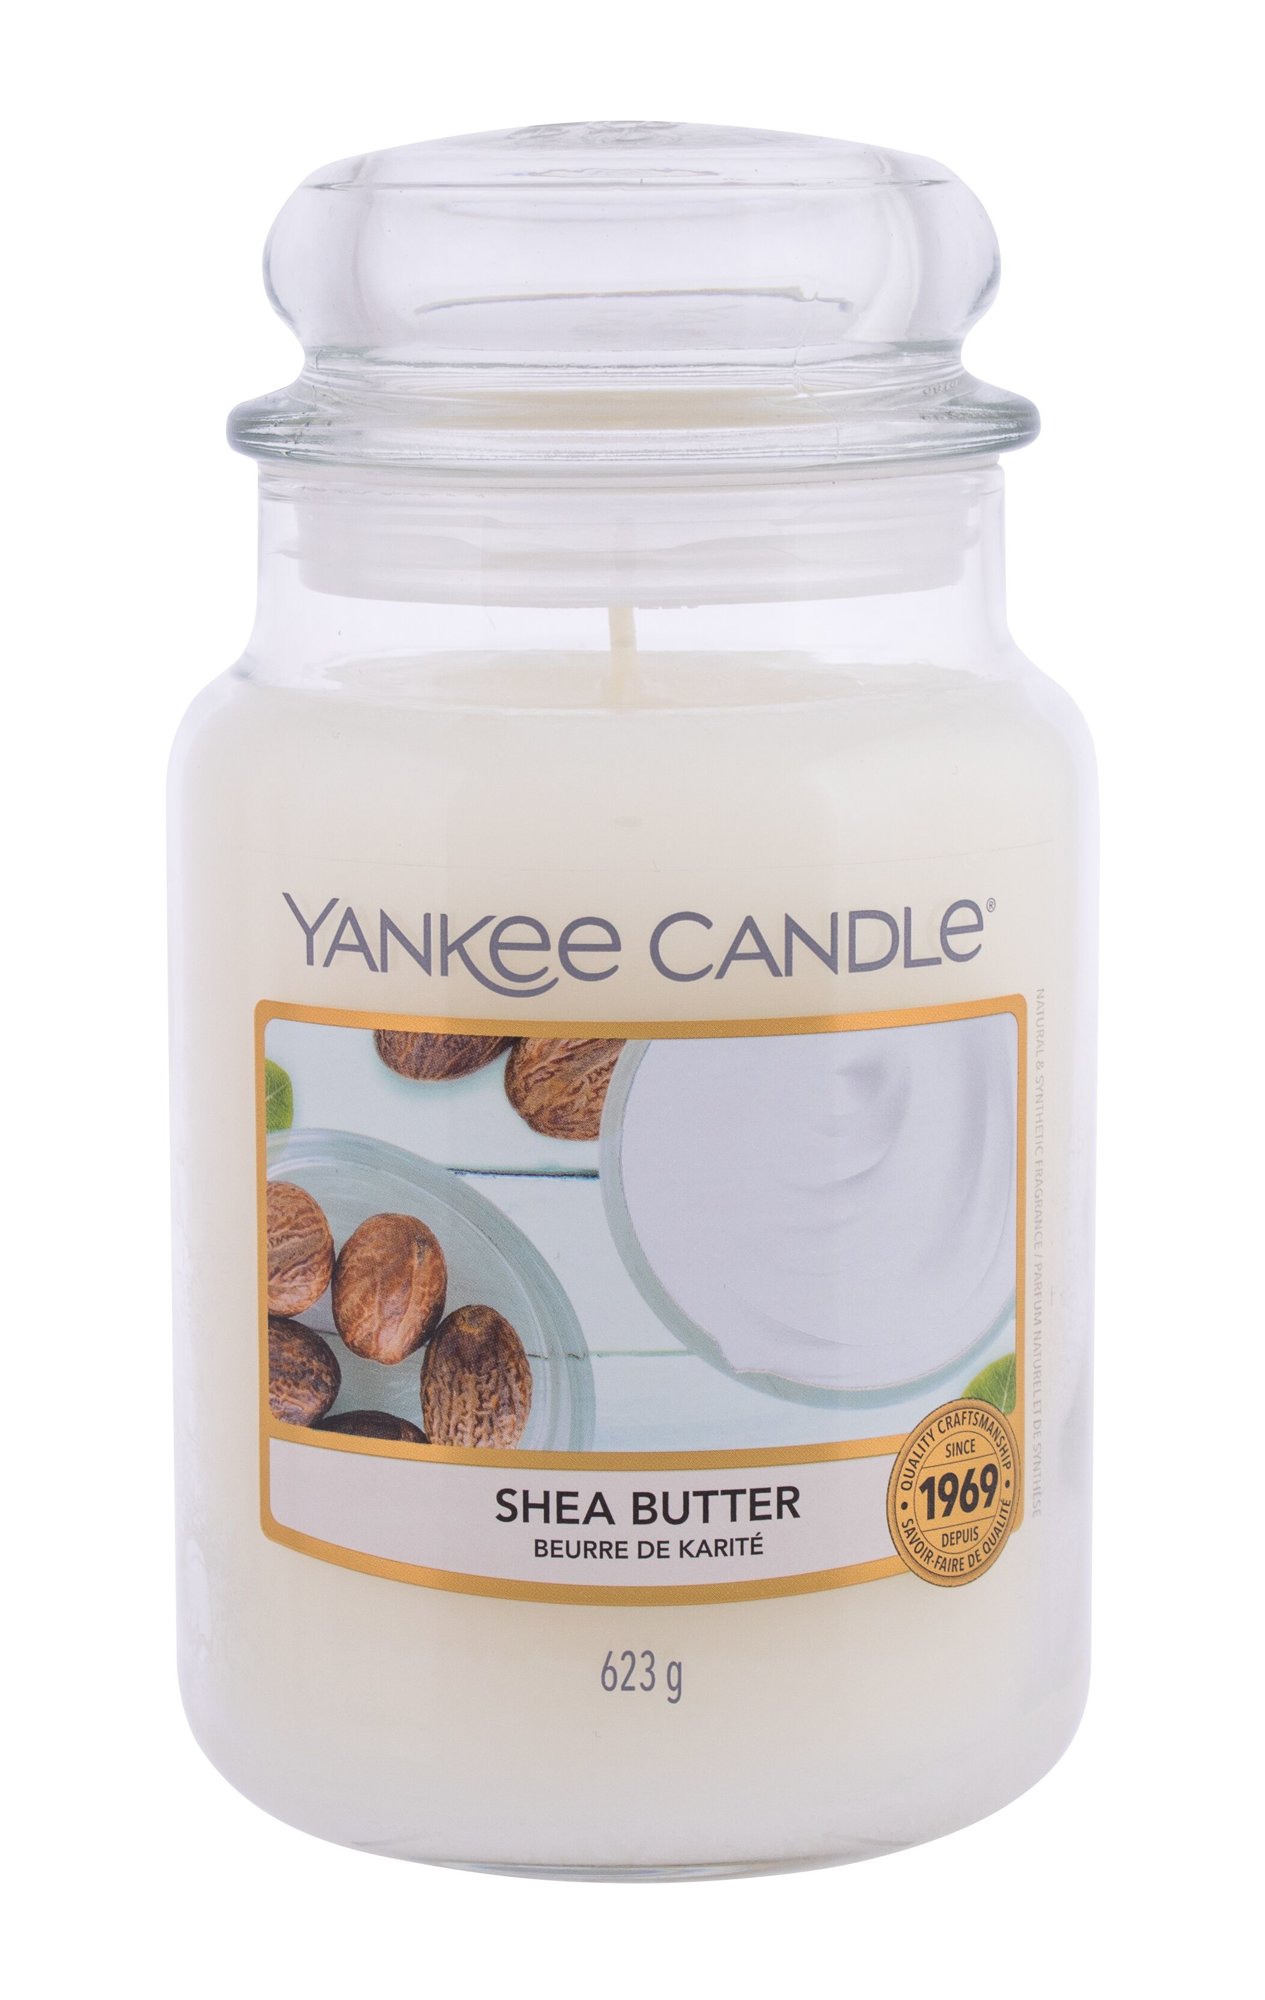 Yankee Candle Shea Butter 623g Kvepalai Unisex Scented Candle